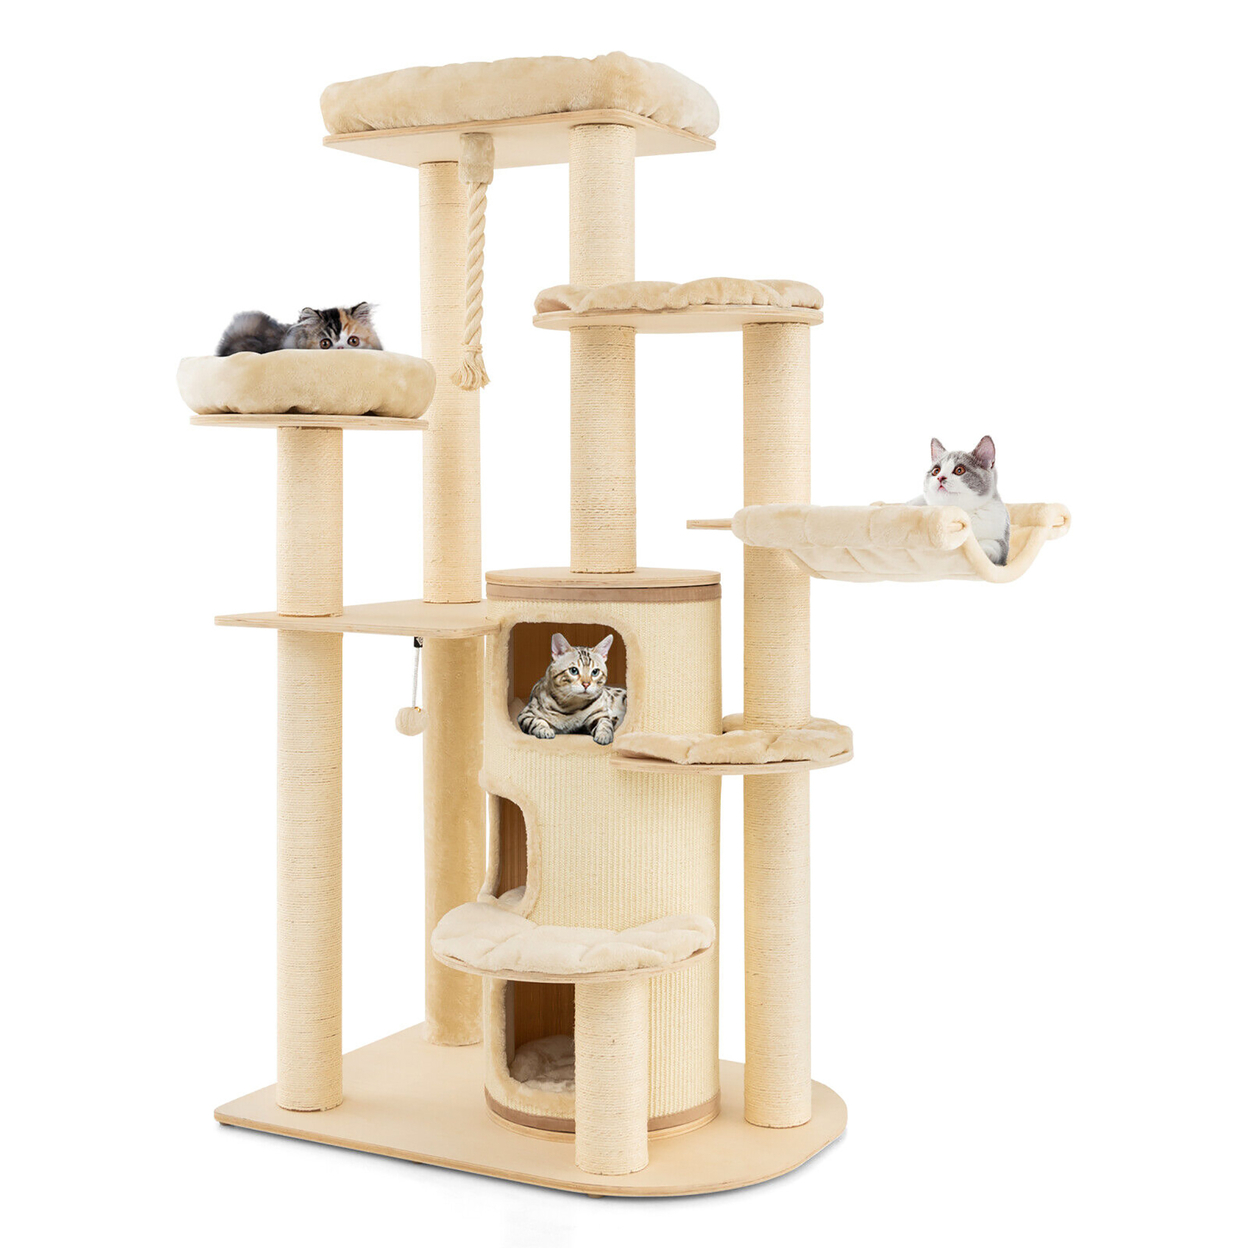 Wooden Cat Tree Multi-Level Kitten Tower W/ Condo Perches Scratching Posts - Beige